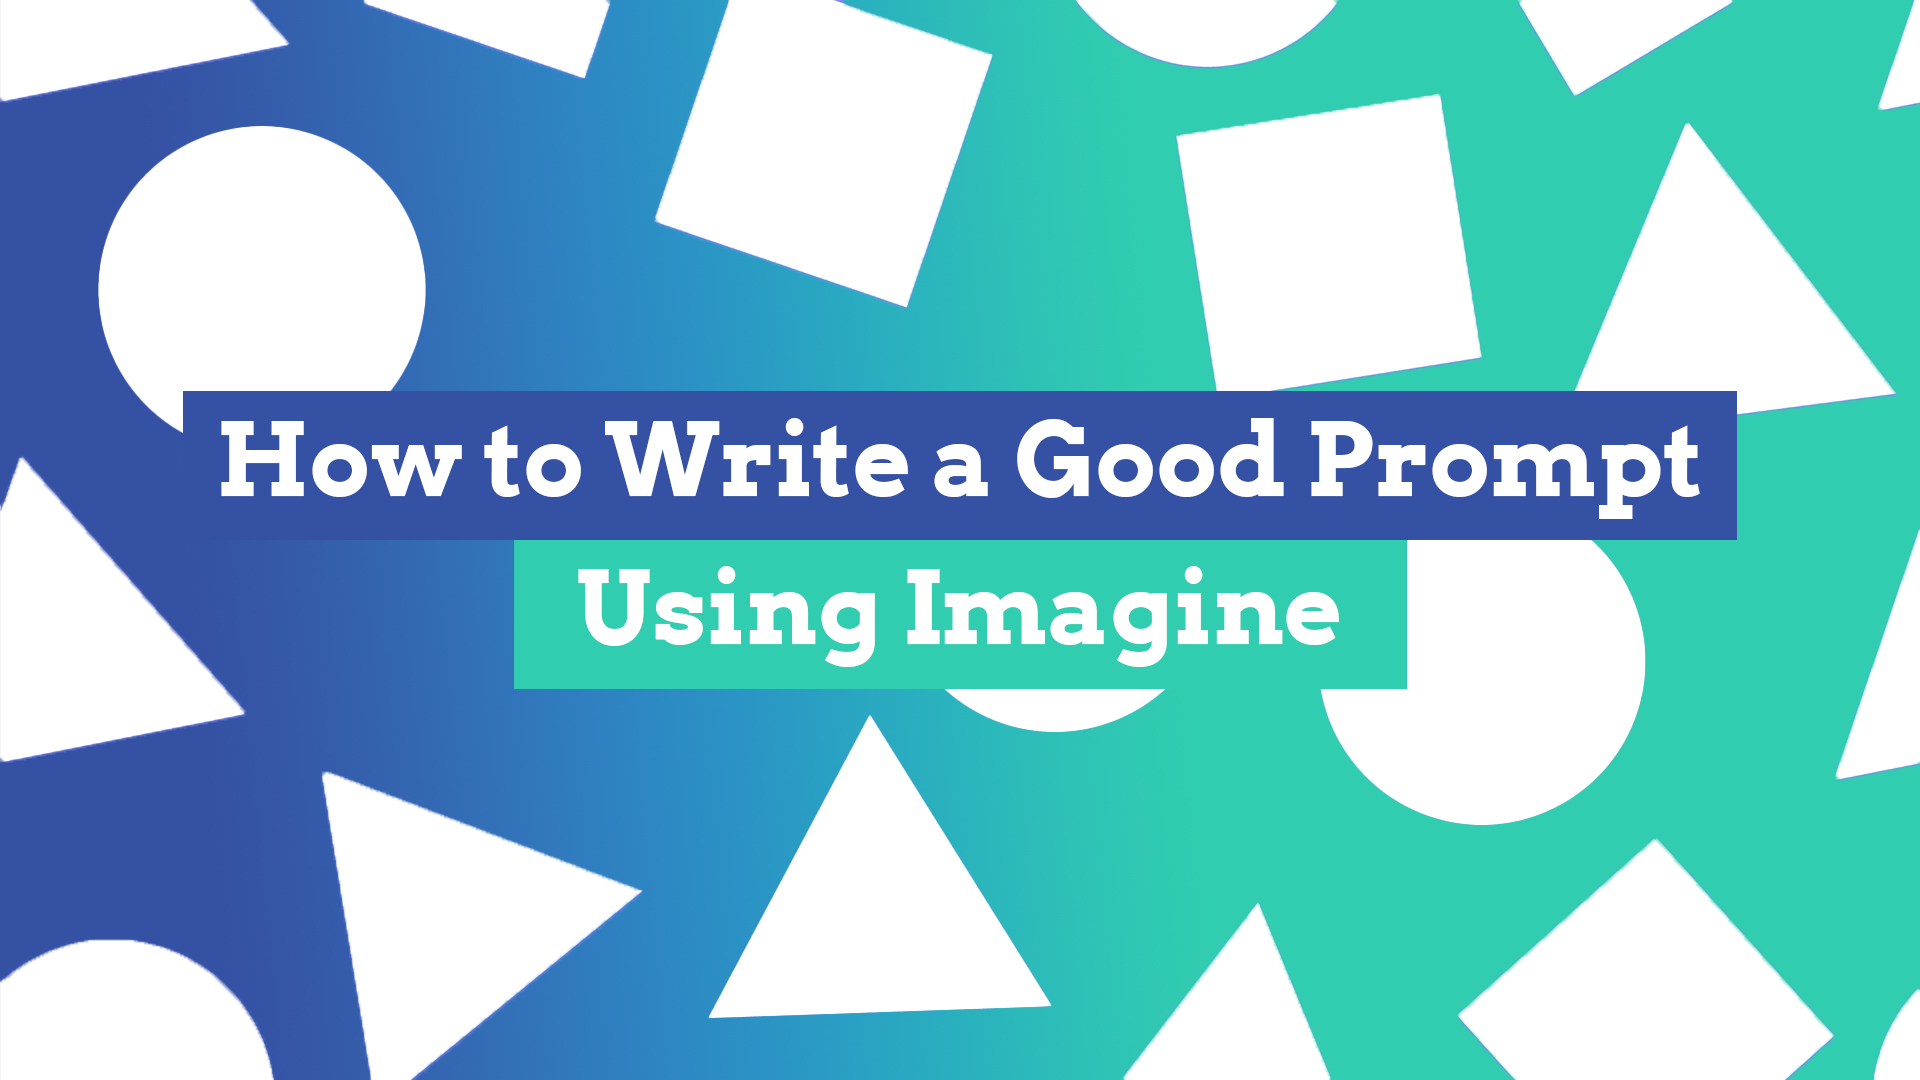 How to Write a Good Prompt Using Imagine